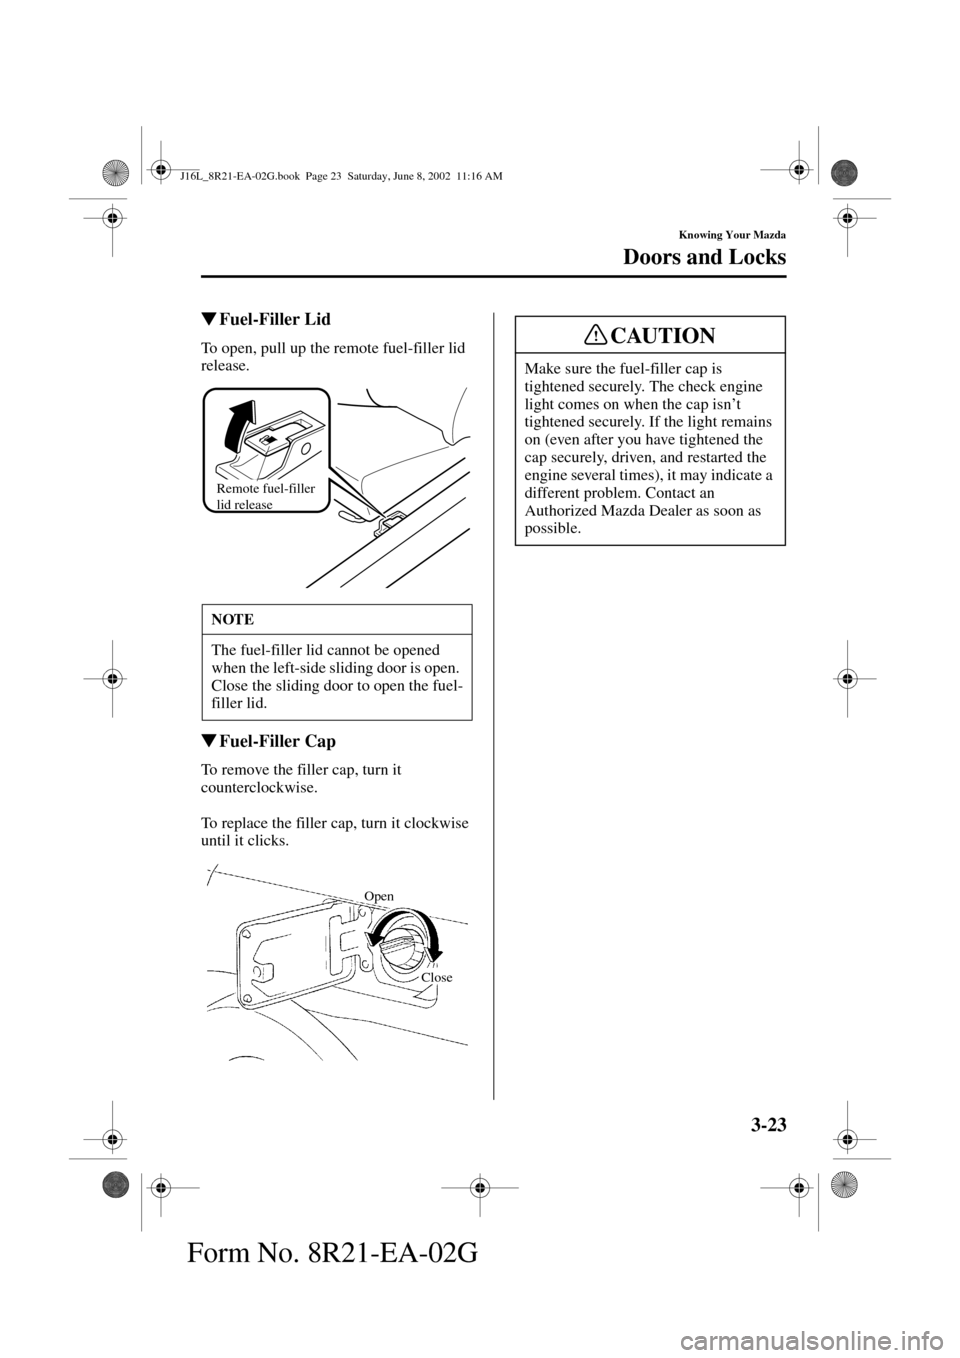 MAZDA MODEL MPV 2003  Owners Manual (in English) 3-23
Knowing Your Mazda
Doors and Locks
Form No. 8R21-EA-02G
Fuel-Filler Lid
To open, pull up the remote fuel-filler lid 
release.
Fuel-Filler Cap
To remove the filler cap, turn it 
counterclockwise